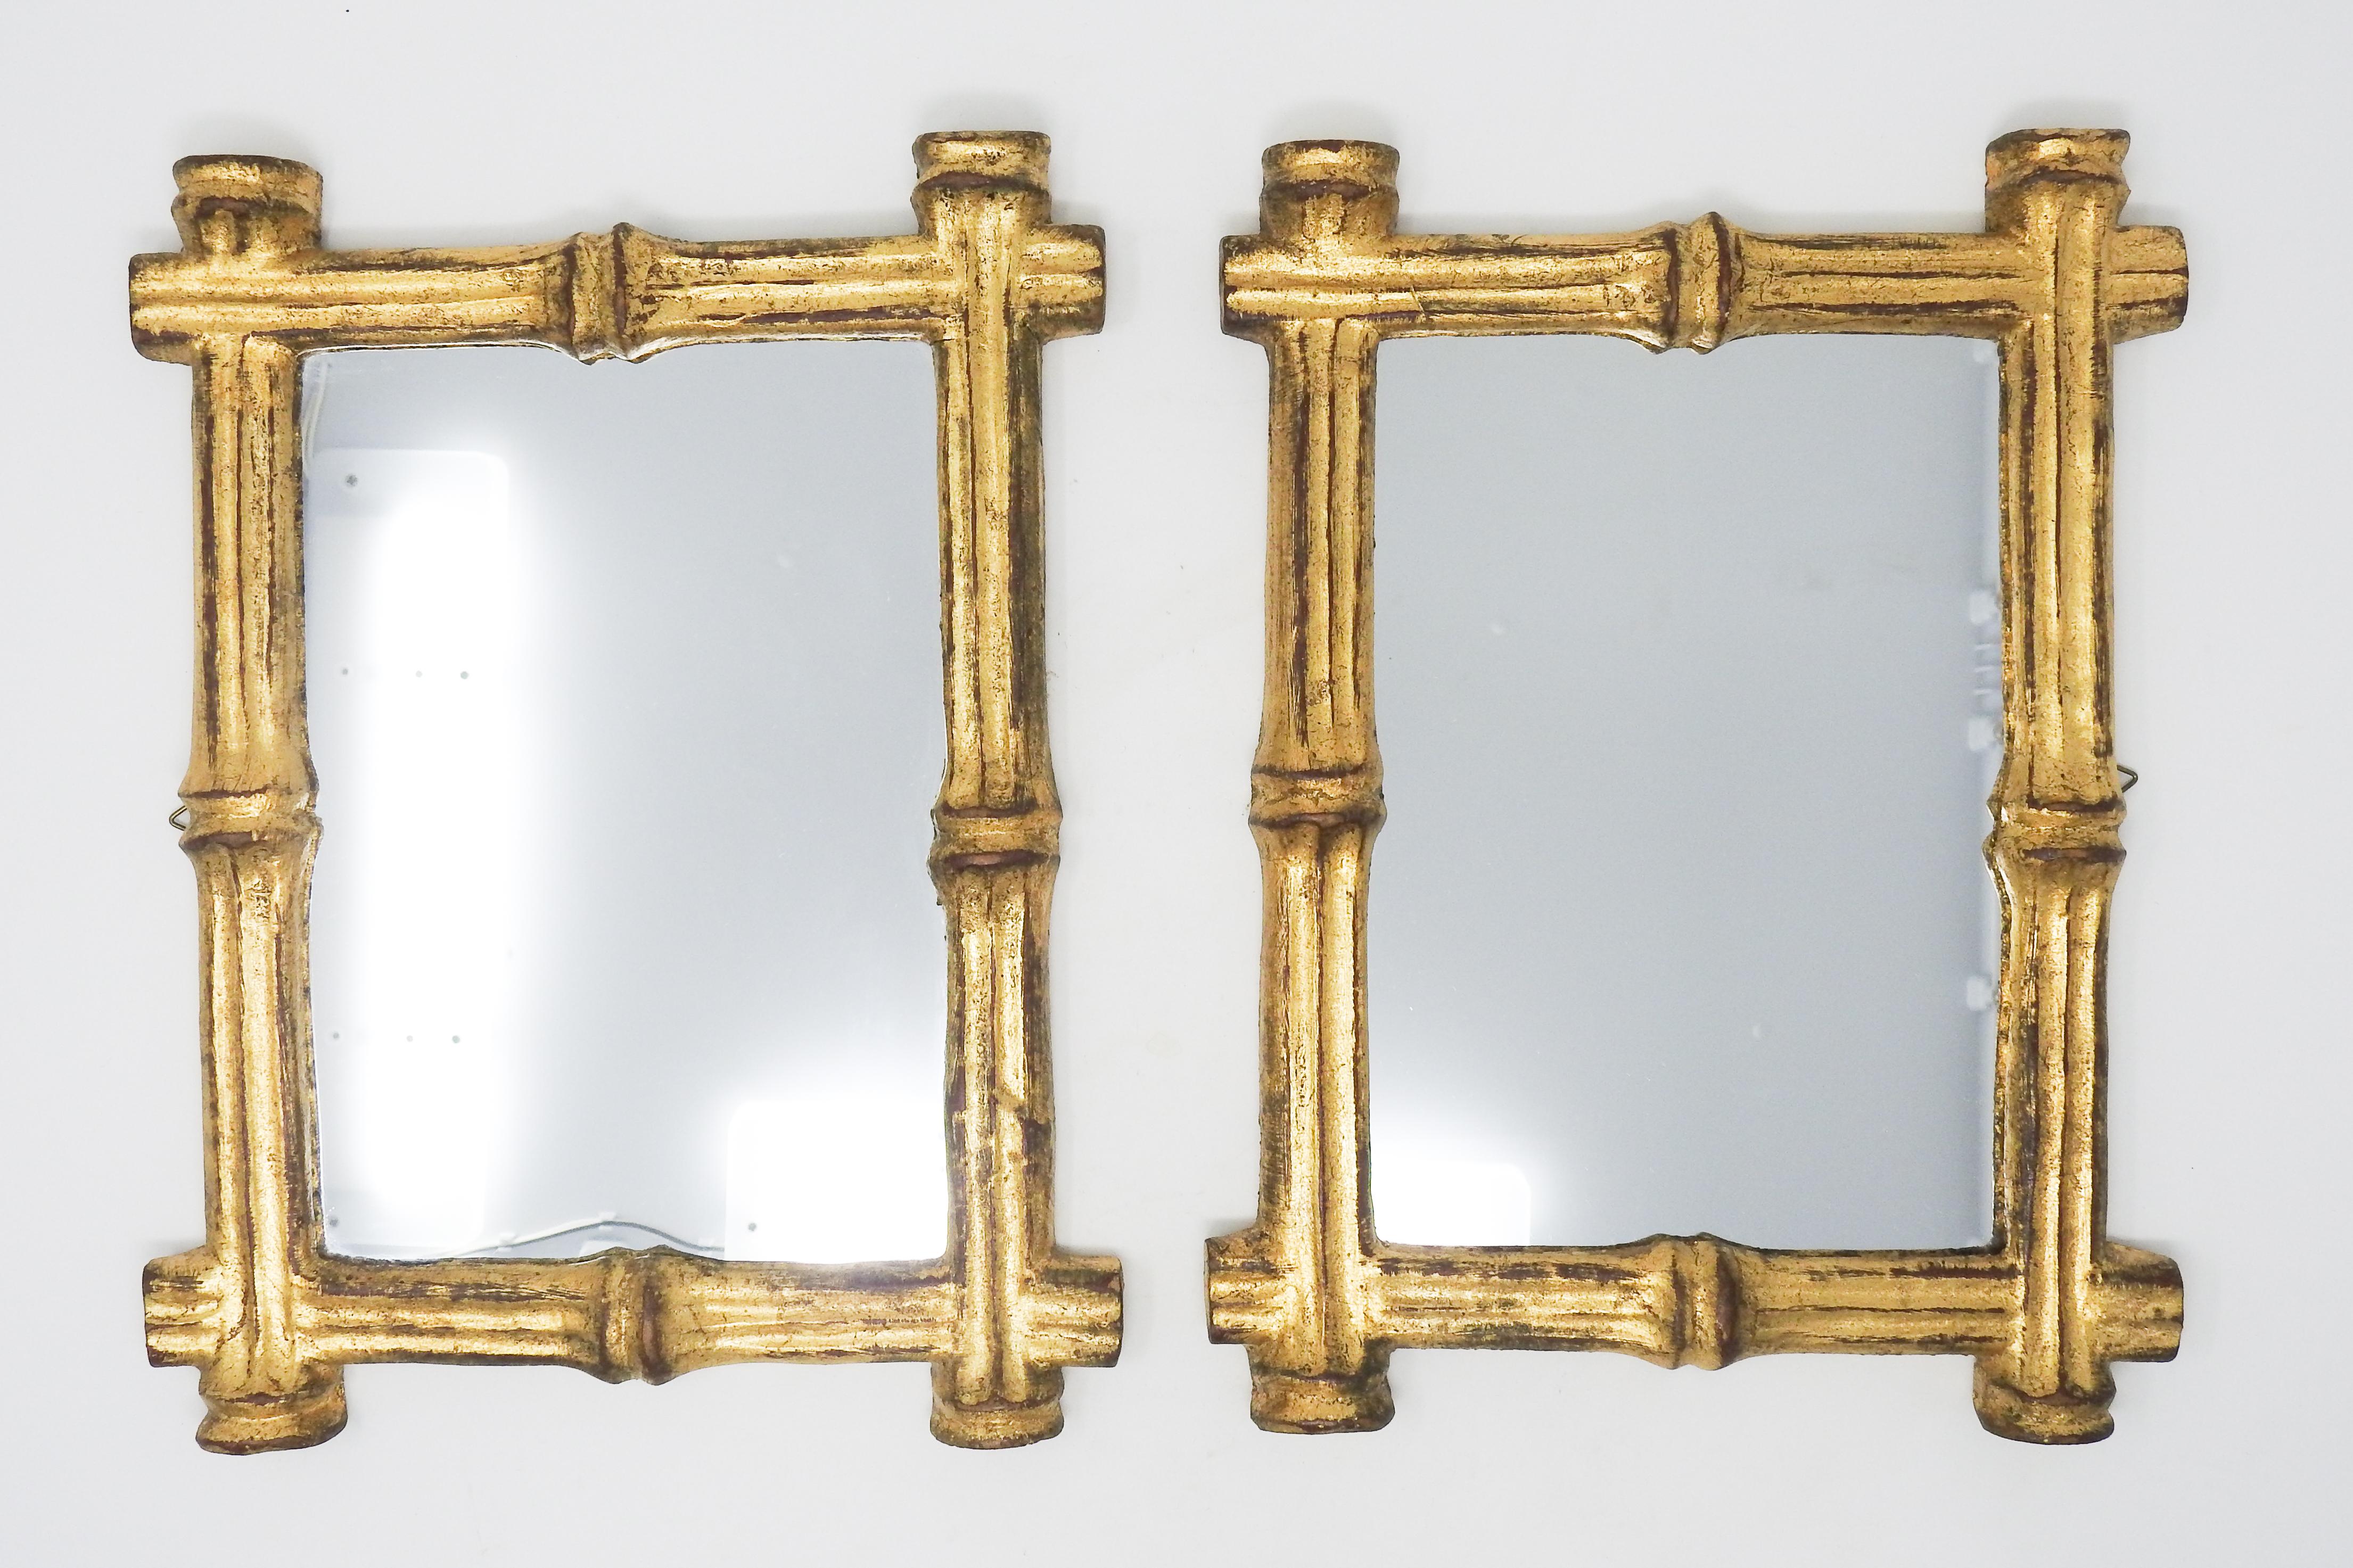 Offering this pair of Italian Florentine bamboo style mirrors. These mirrors are an adorable pair that will add a cute look to any room. The frames are faux bamboo with gold gilt work. The backs are papered in the standard Florentine paper, one